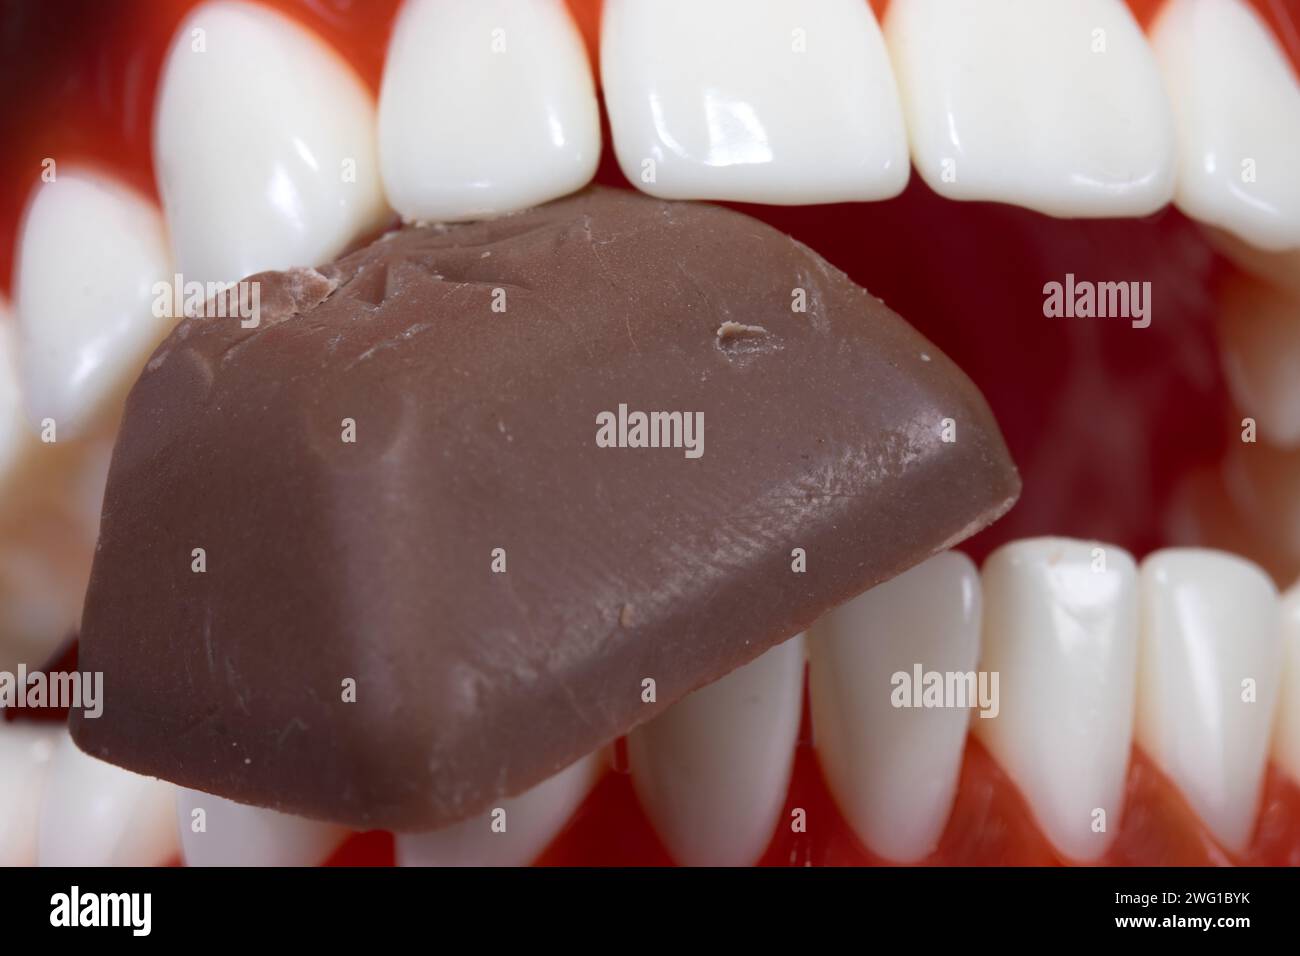 A chocolate candy between teeth, close up Stock Photo